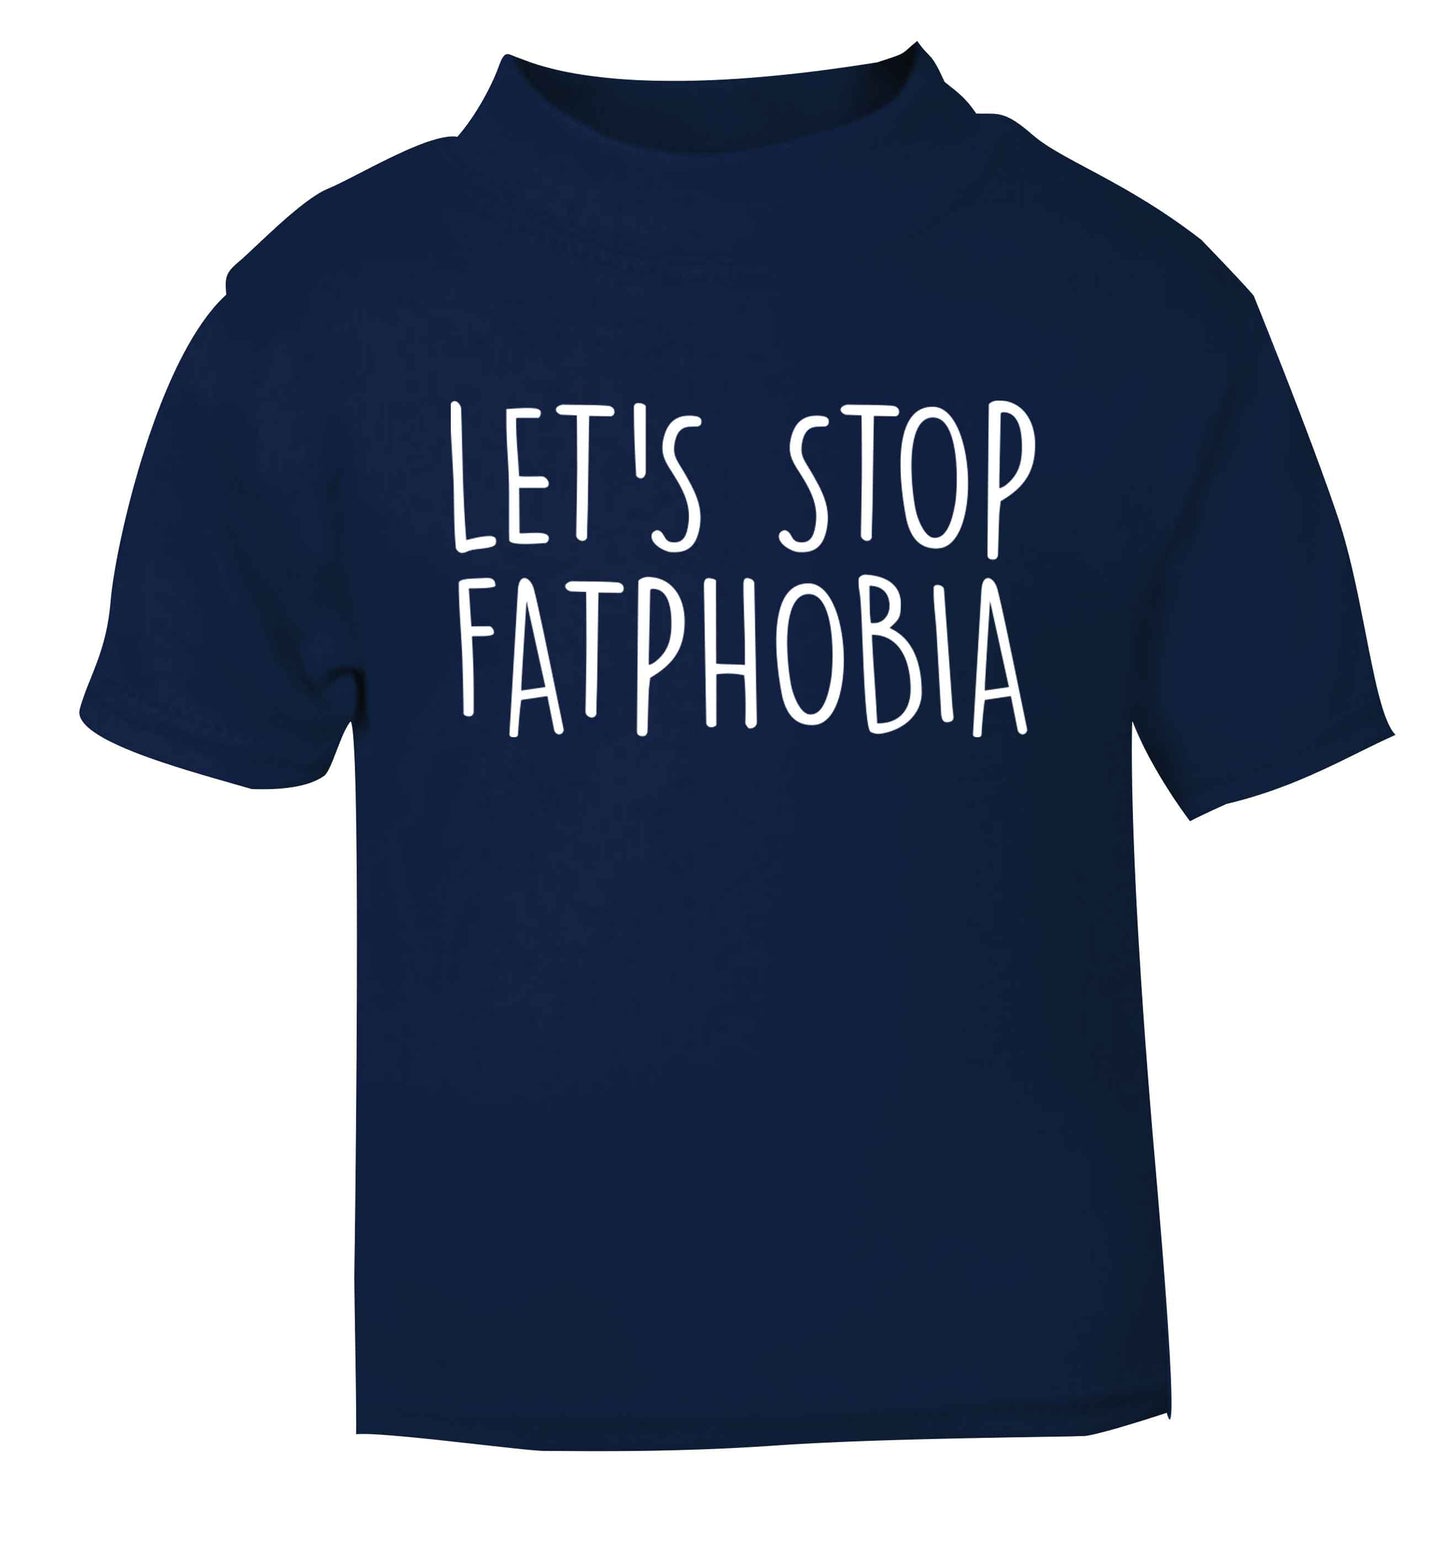 Let's stop fatphobia navy baby toddler Tshirt 2 Years